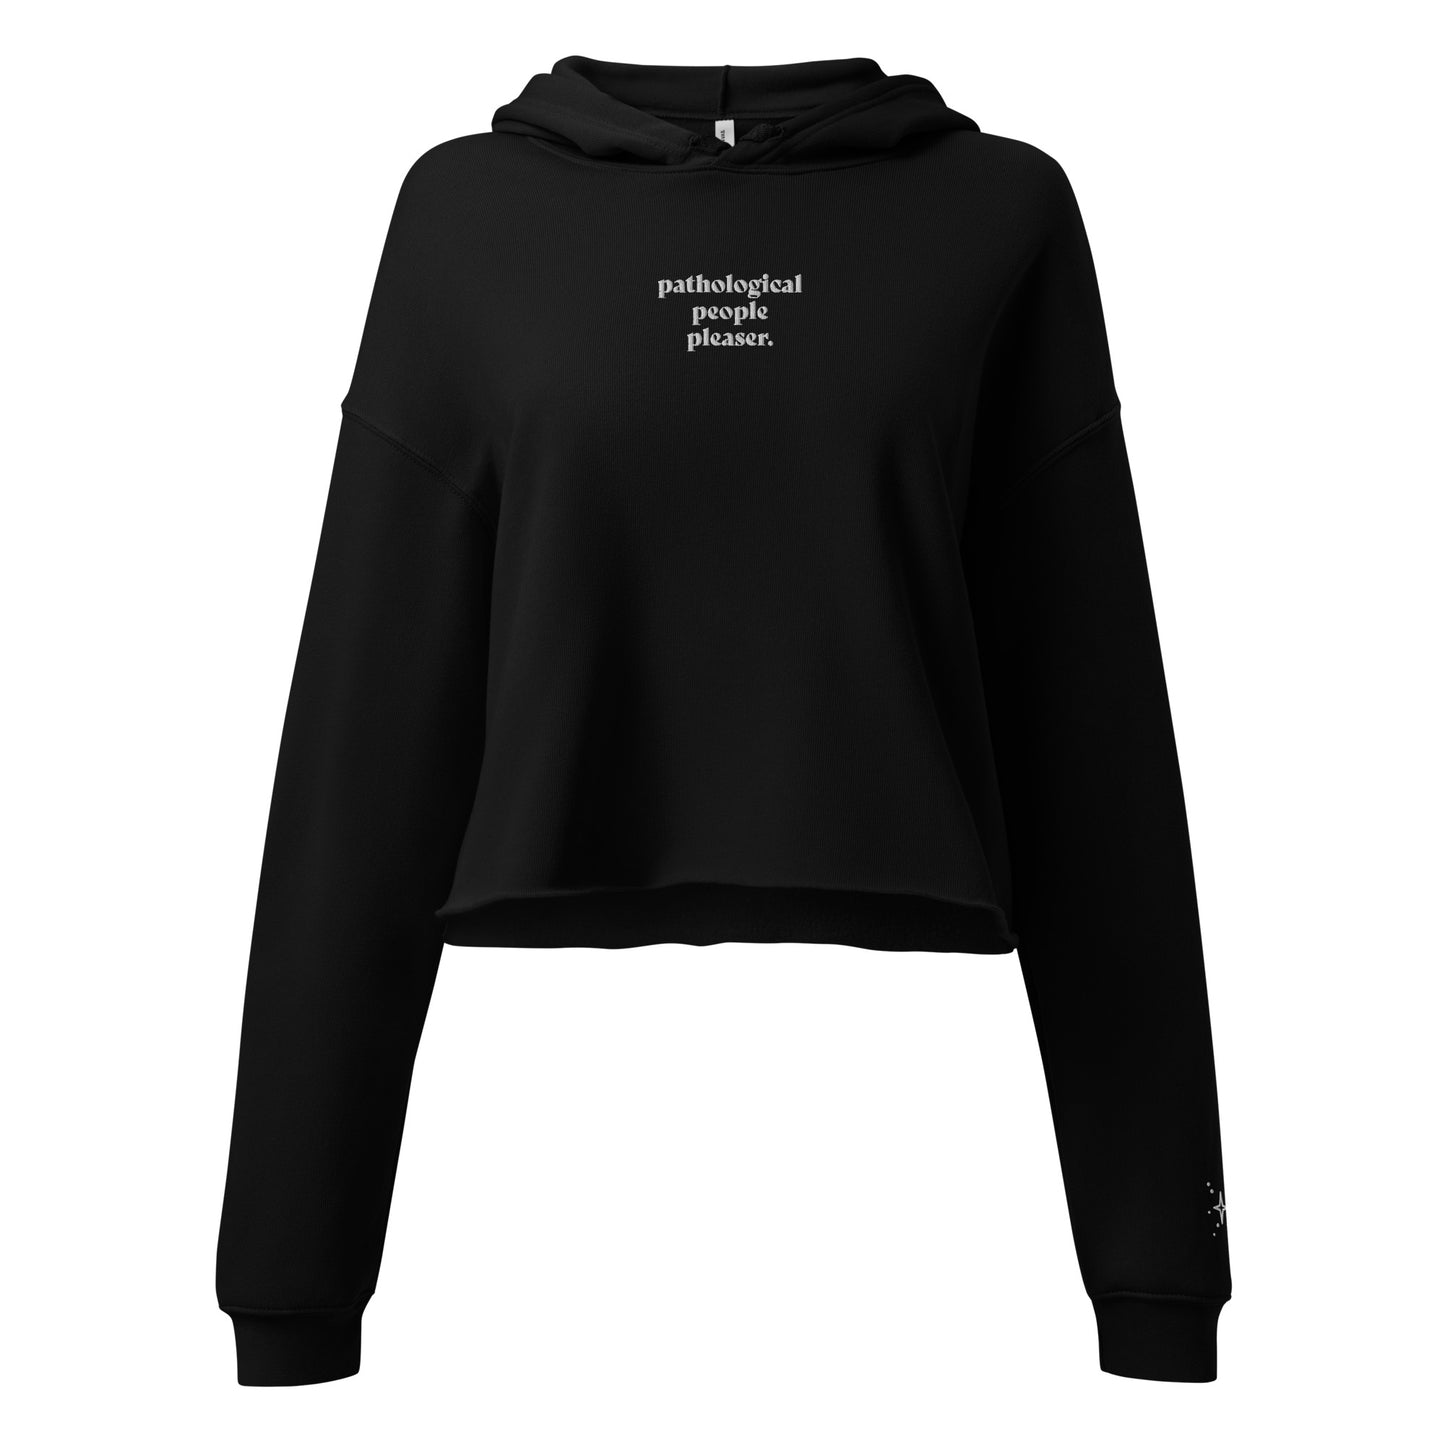 Pathological People Pleaser Cropped Hoodie With Bejeweled Sparkles on Left Wrist